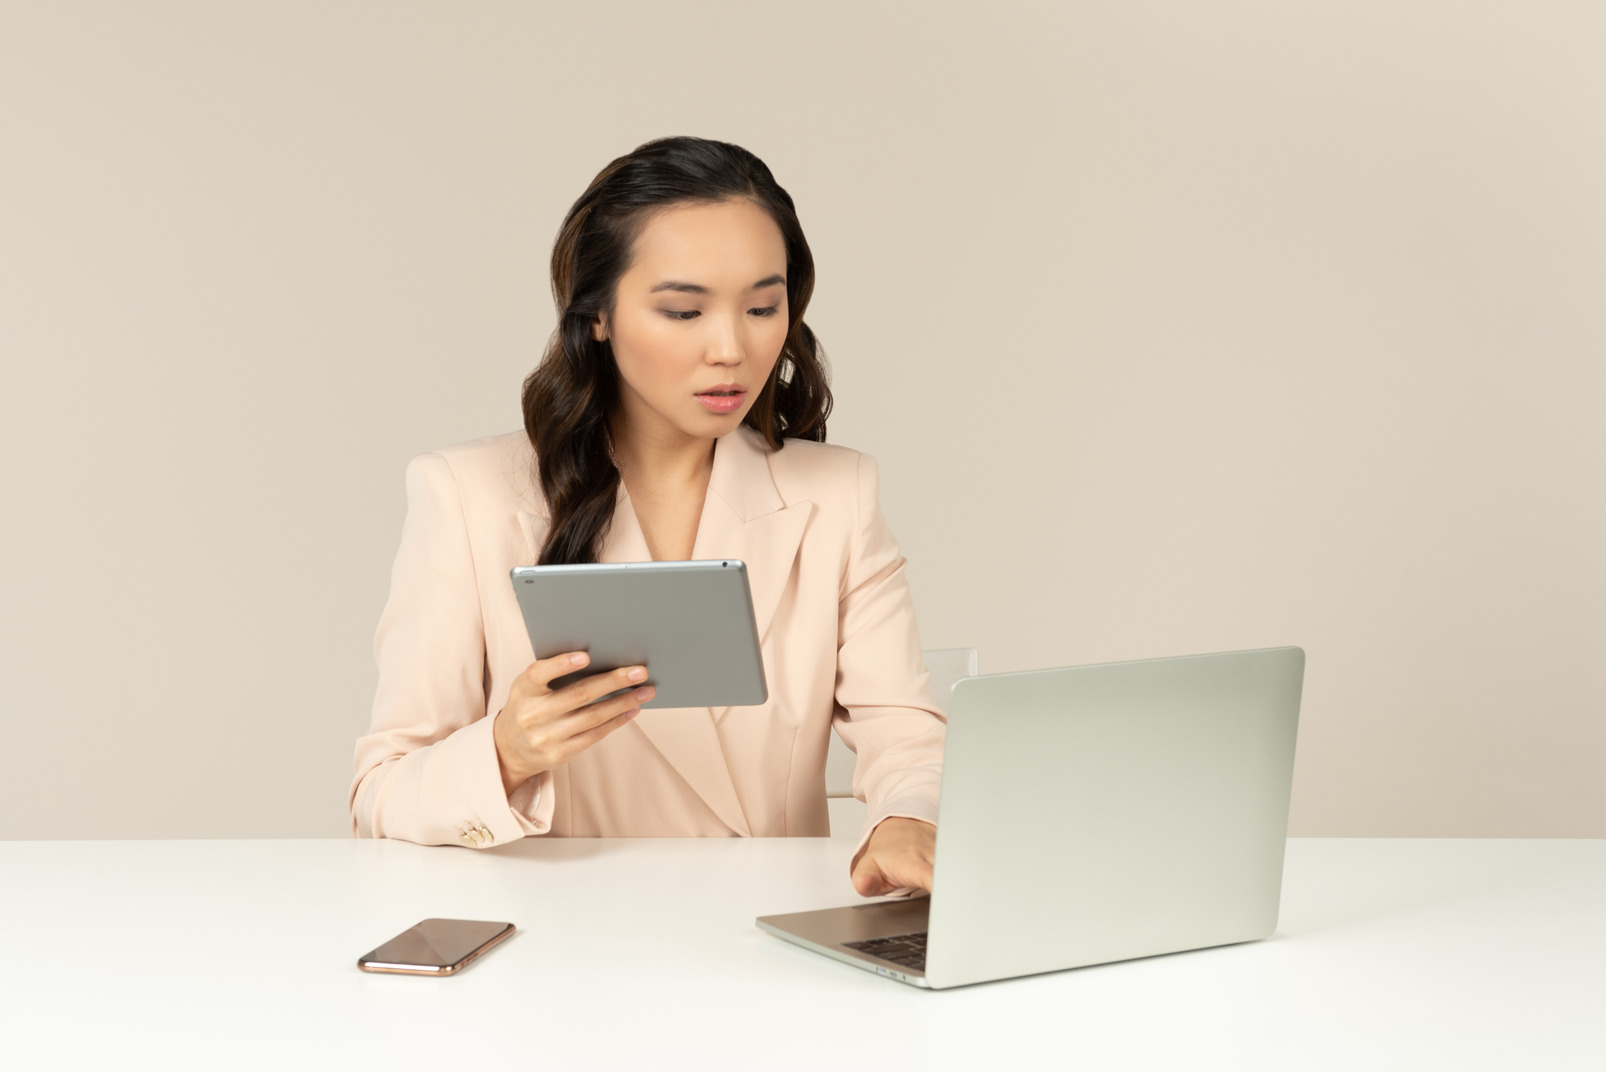 Asian female office employee working on laptop and holding tablet